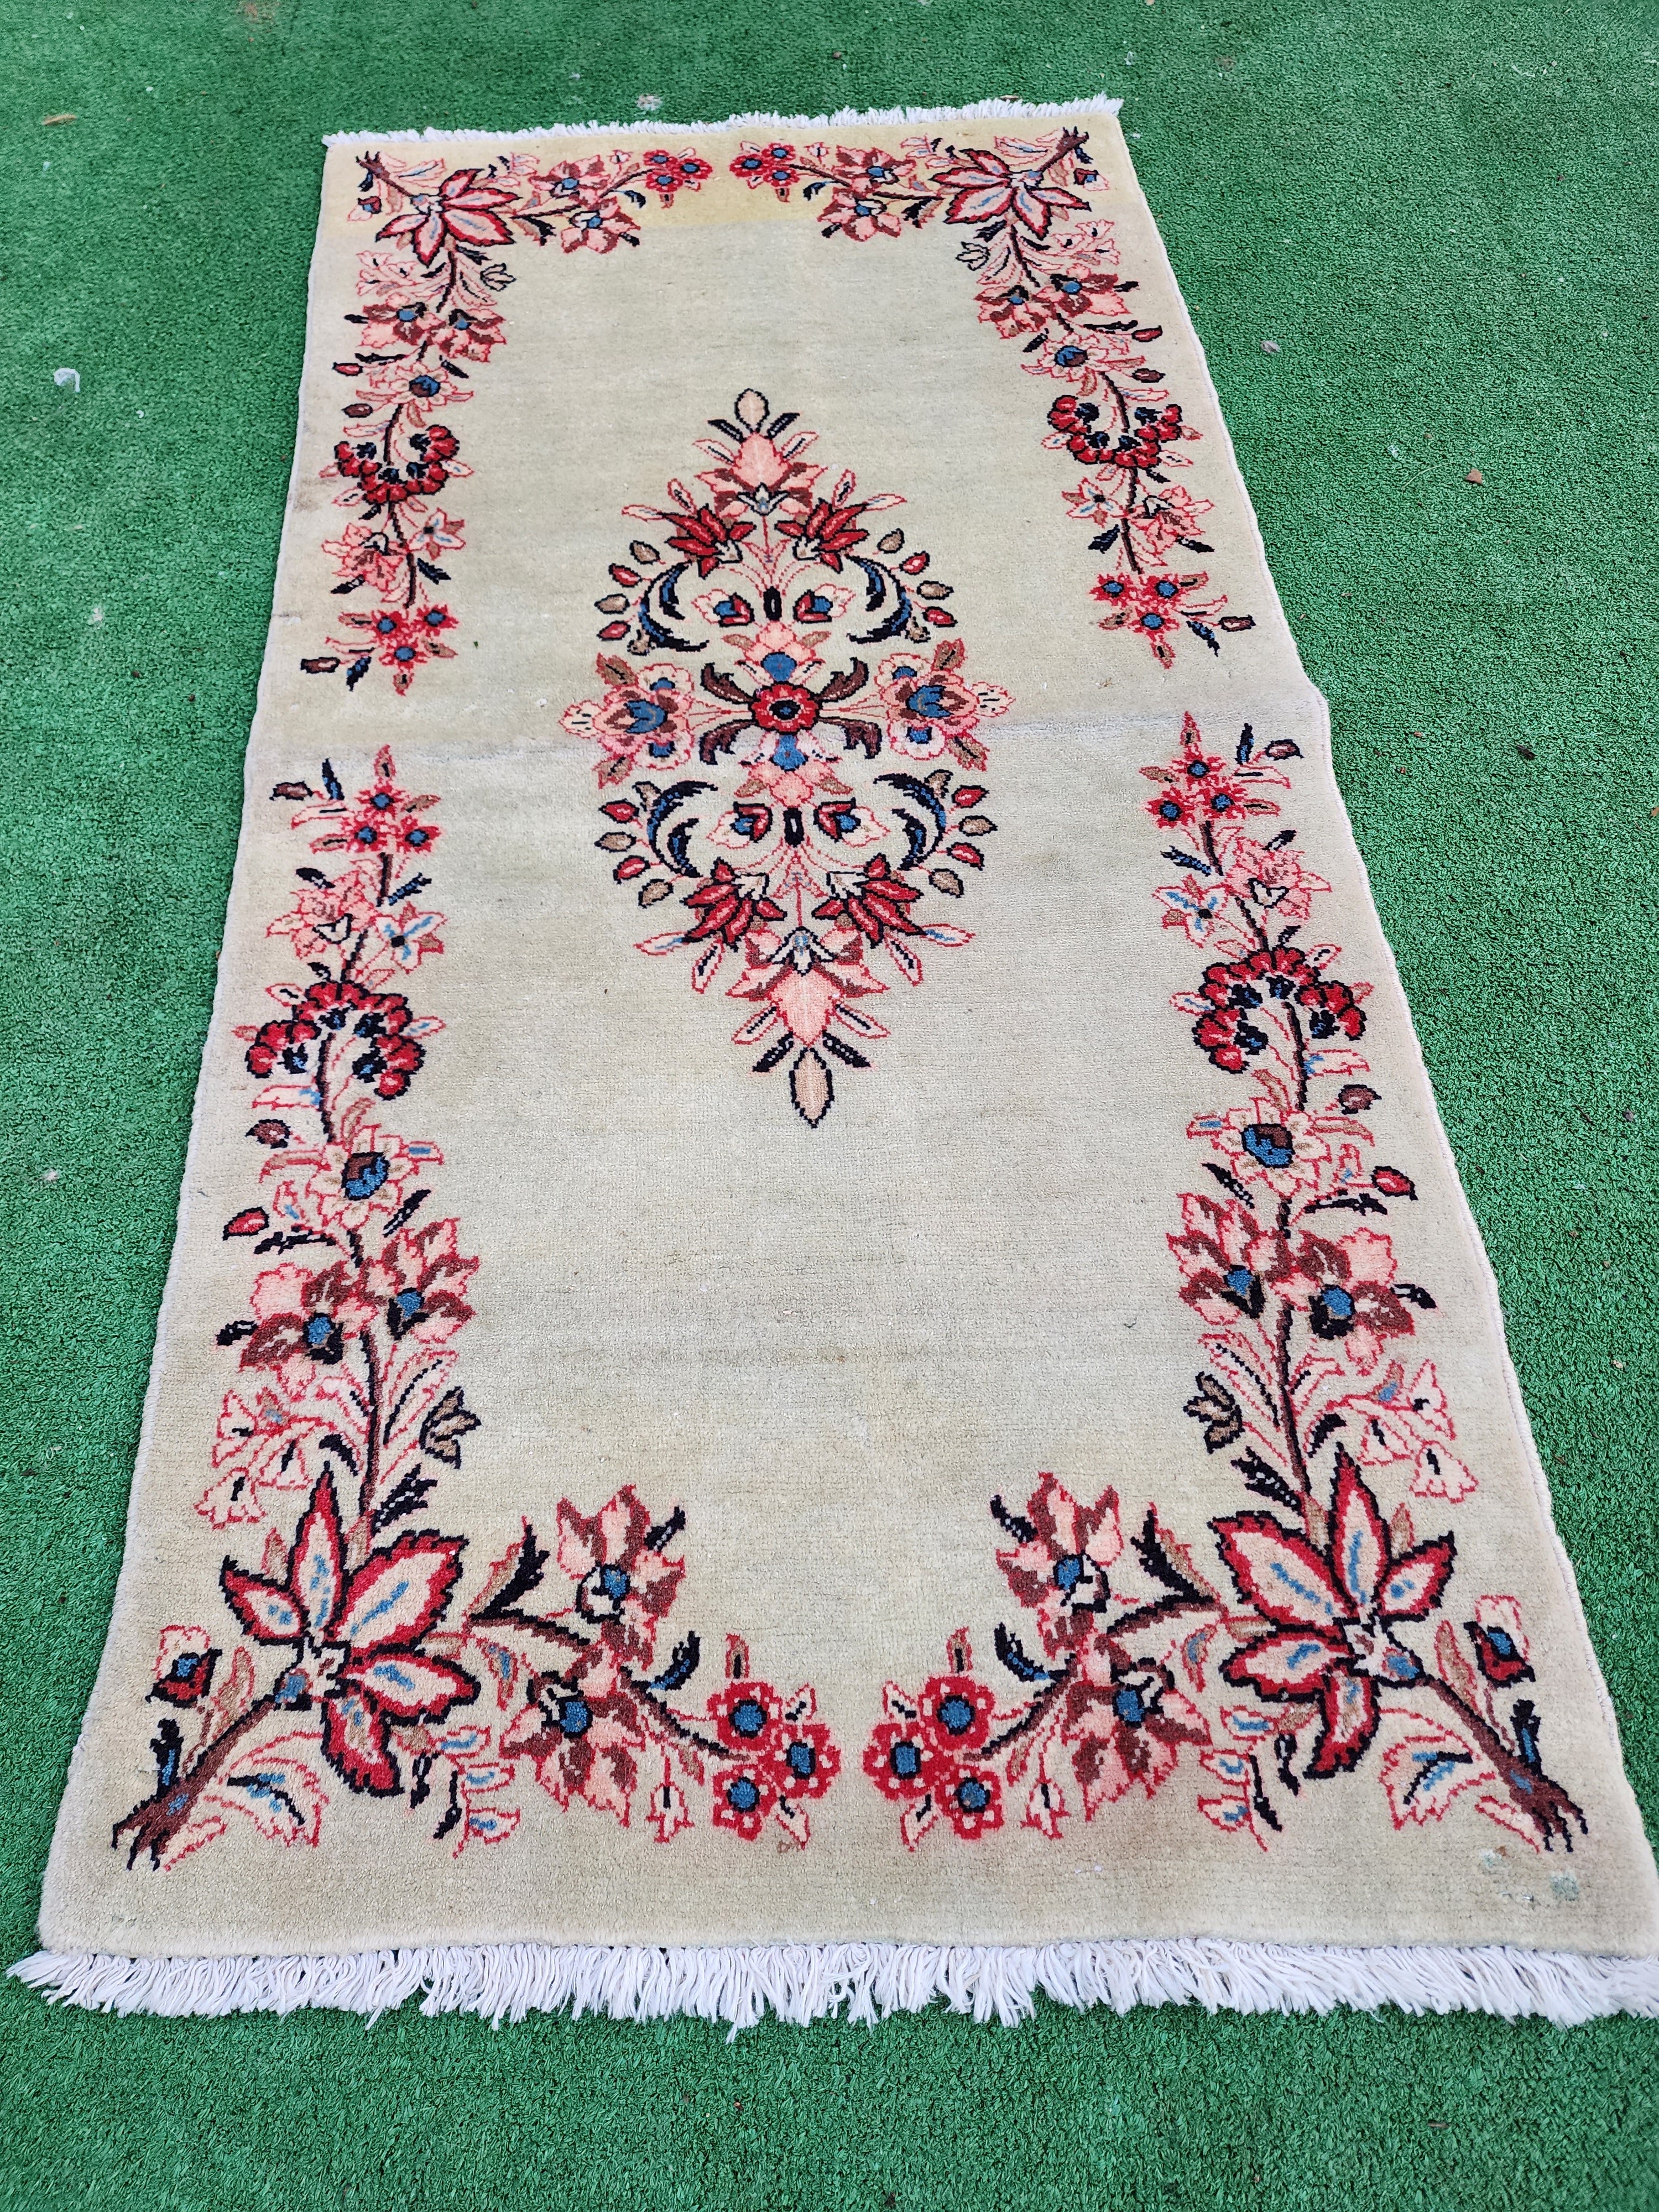 Small Persian Rug 4 x 2 ft, Beige, Red and Brown Floral Turkish Handmade Door Mat